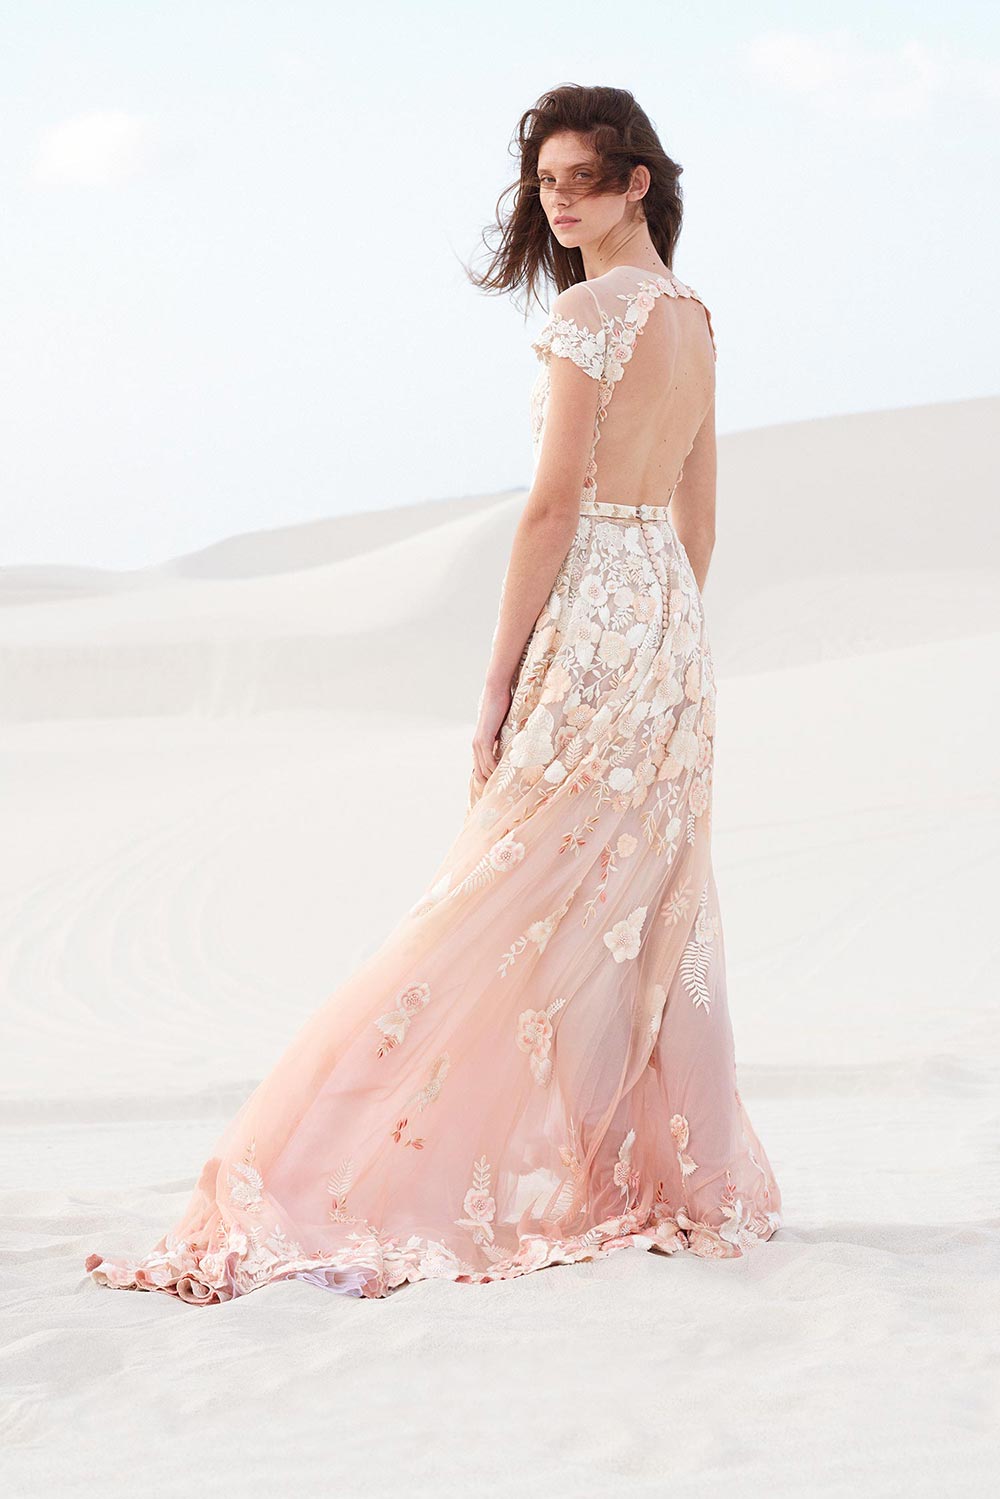 blush backless wedding dress with white floral appliqués